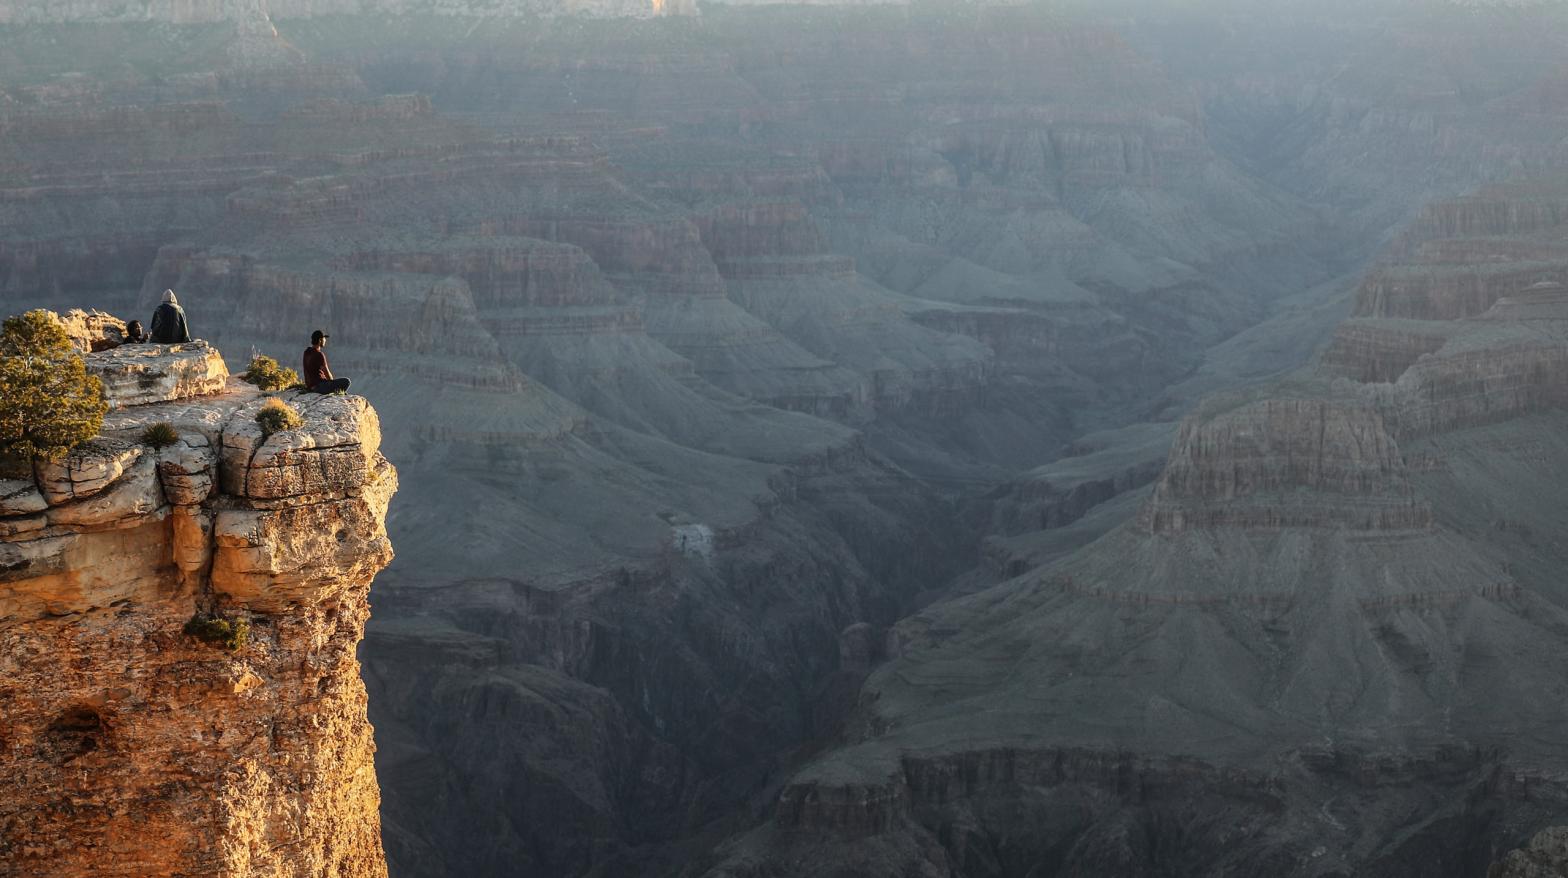 The Grand Canyon is not safe from microplastics. (Photo: Getty)